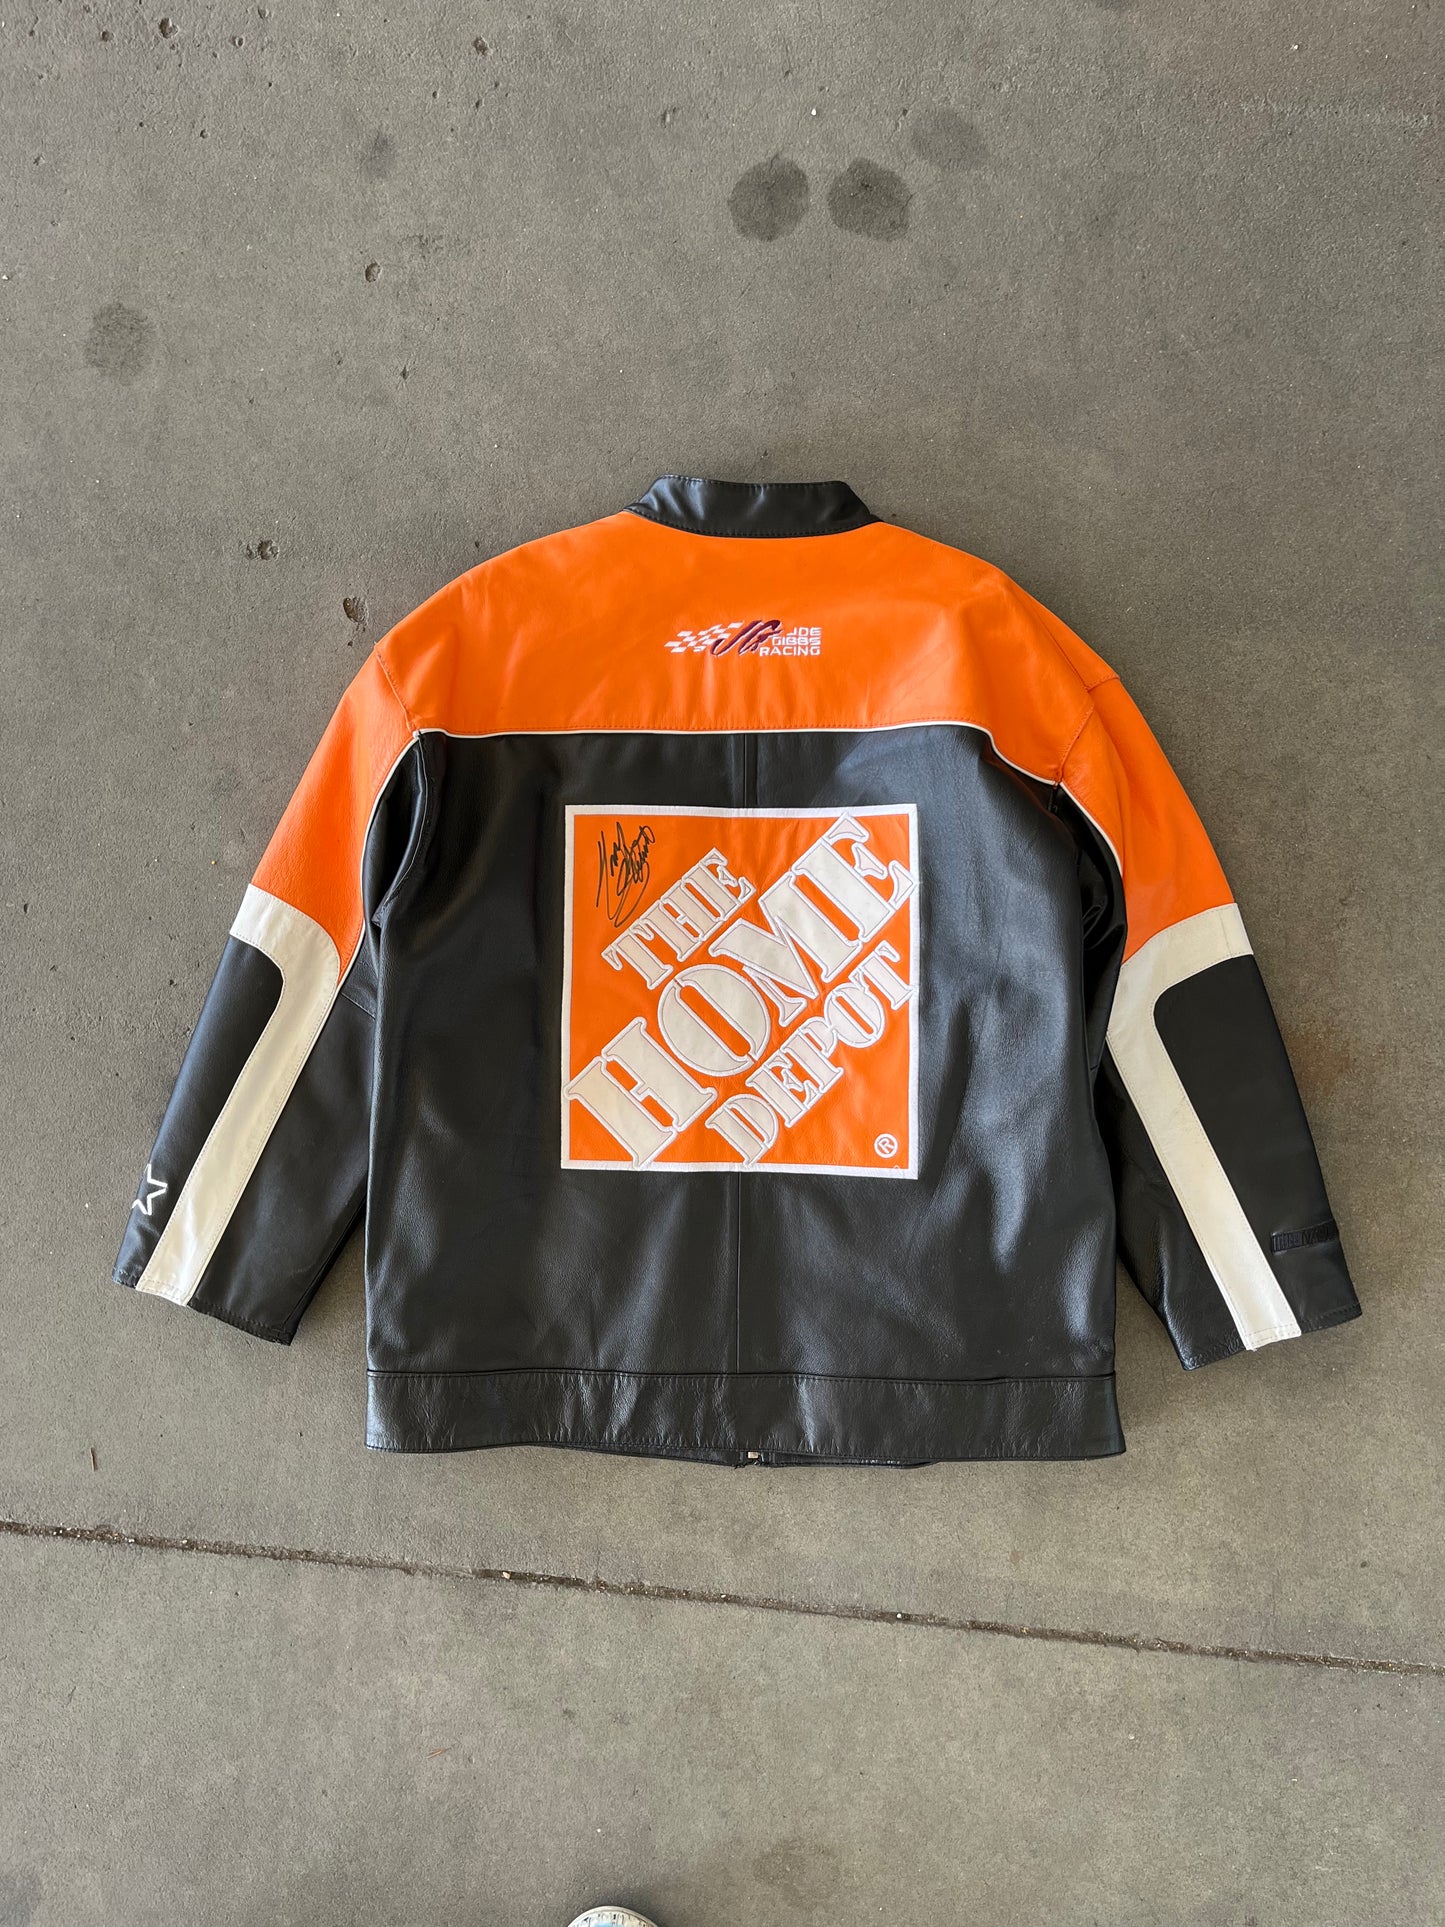 90s Home Depot Racing Full Leather